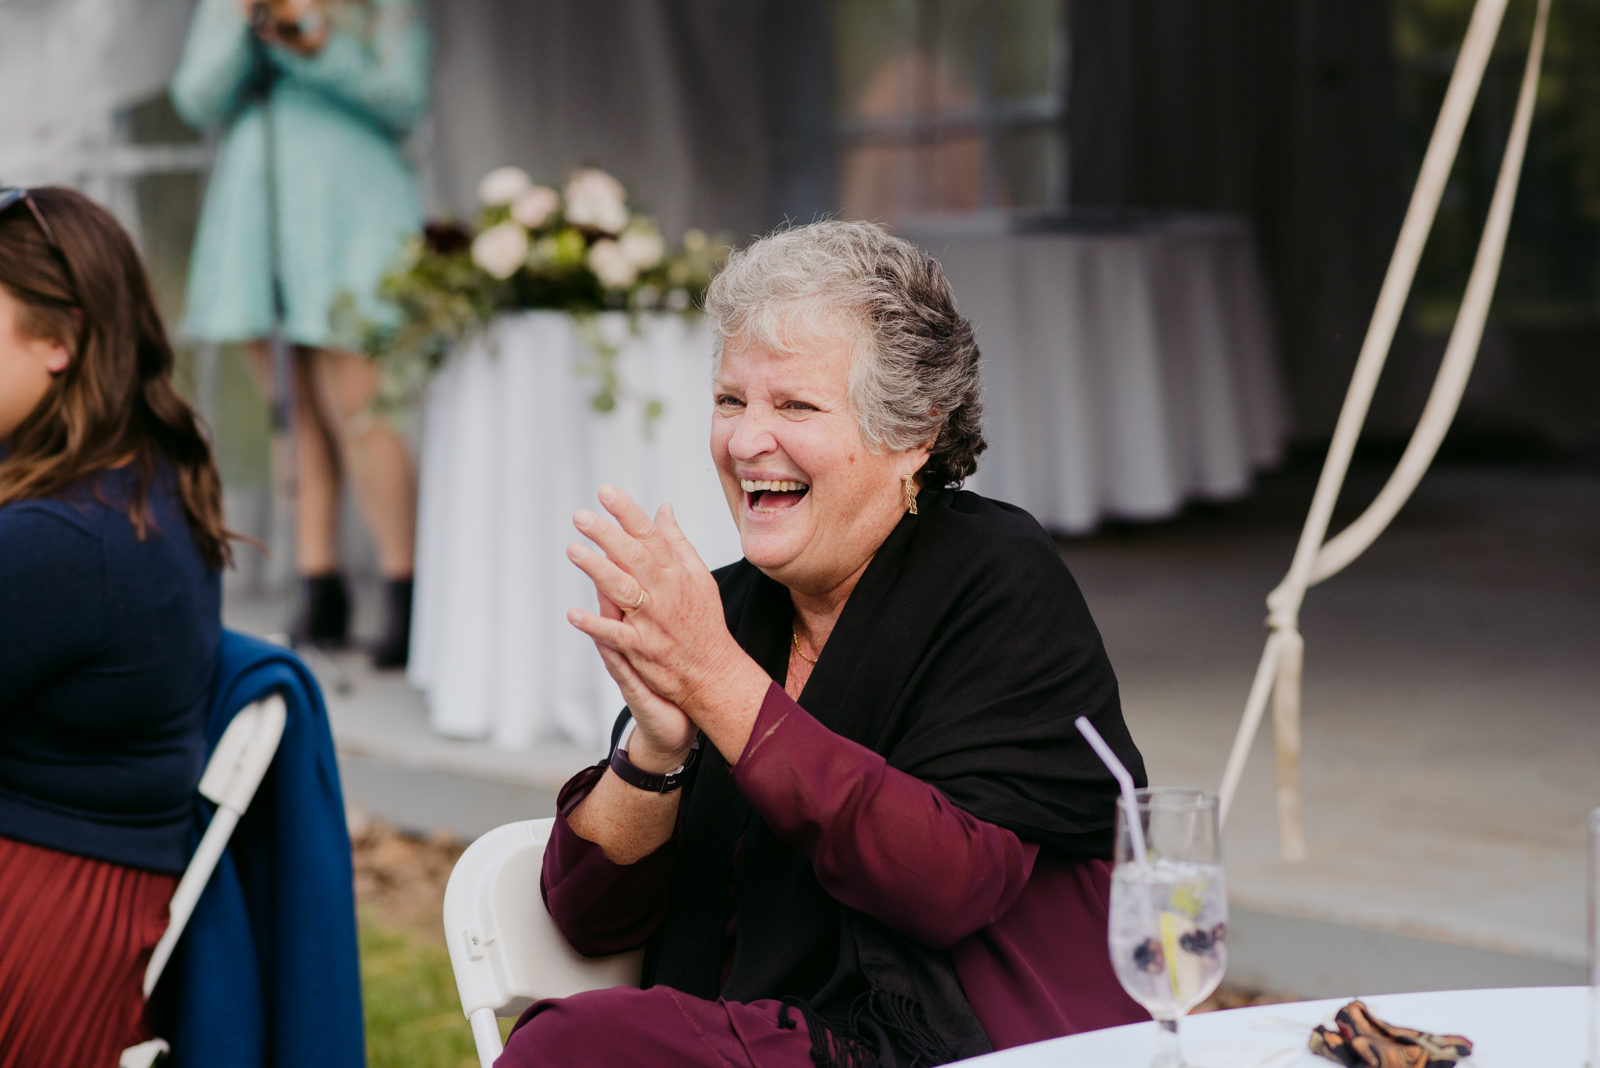 wedding guest laughing during speeches at outdoor wedding reception